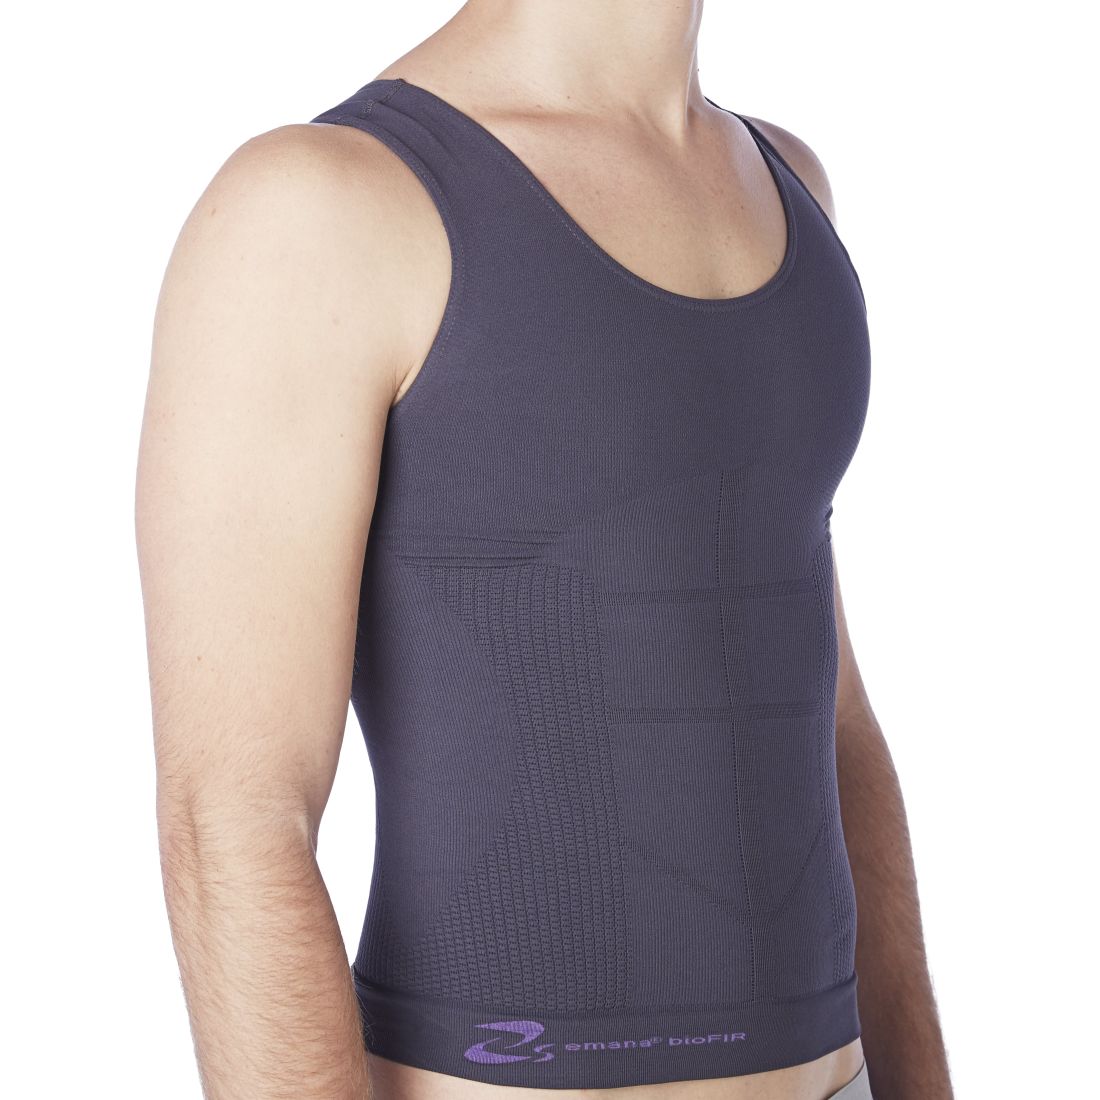 Lymphedema Compression Slimming Vest Tank Top with Posture Support